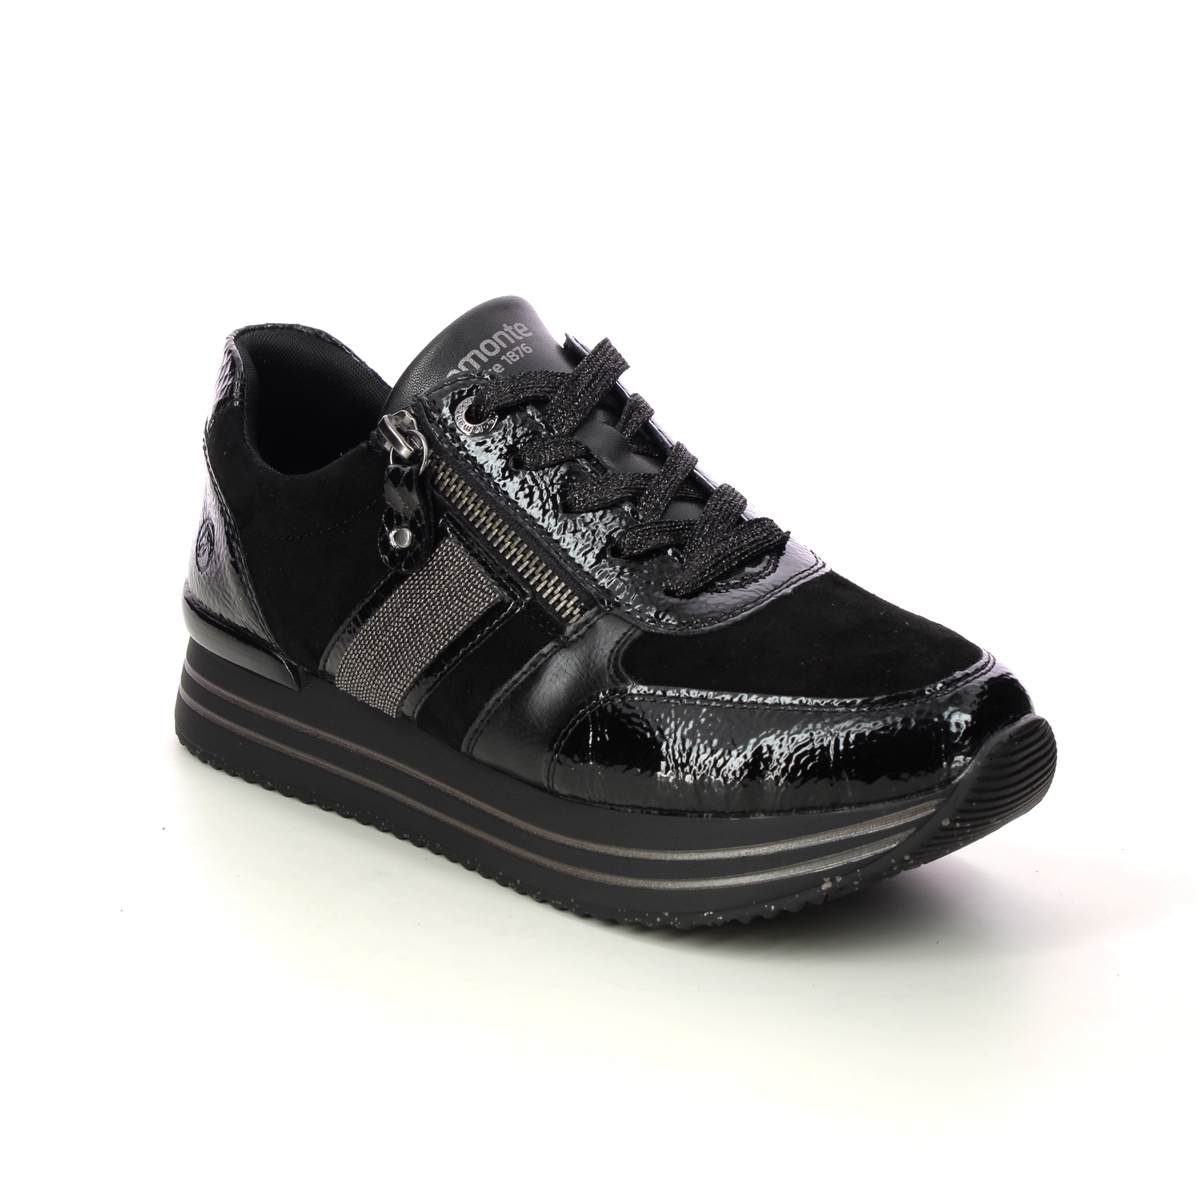 Remonte Ranger Black Patent Suede Womens Trainers D1321-01 In Size 37 In Plain Black Patent Suede